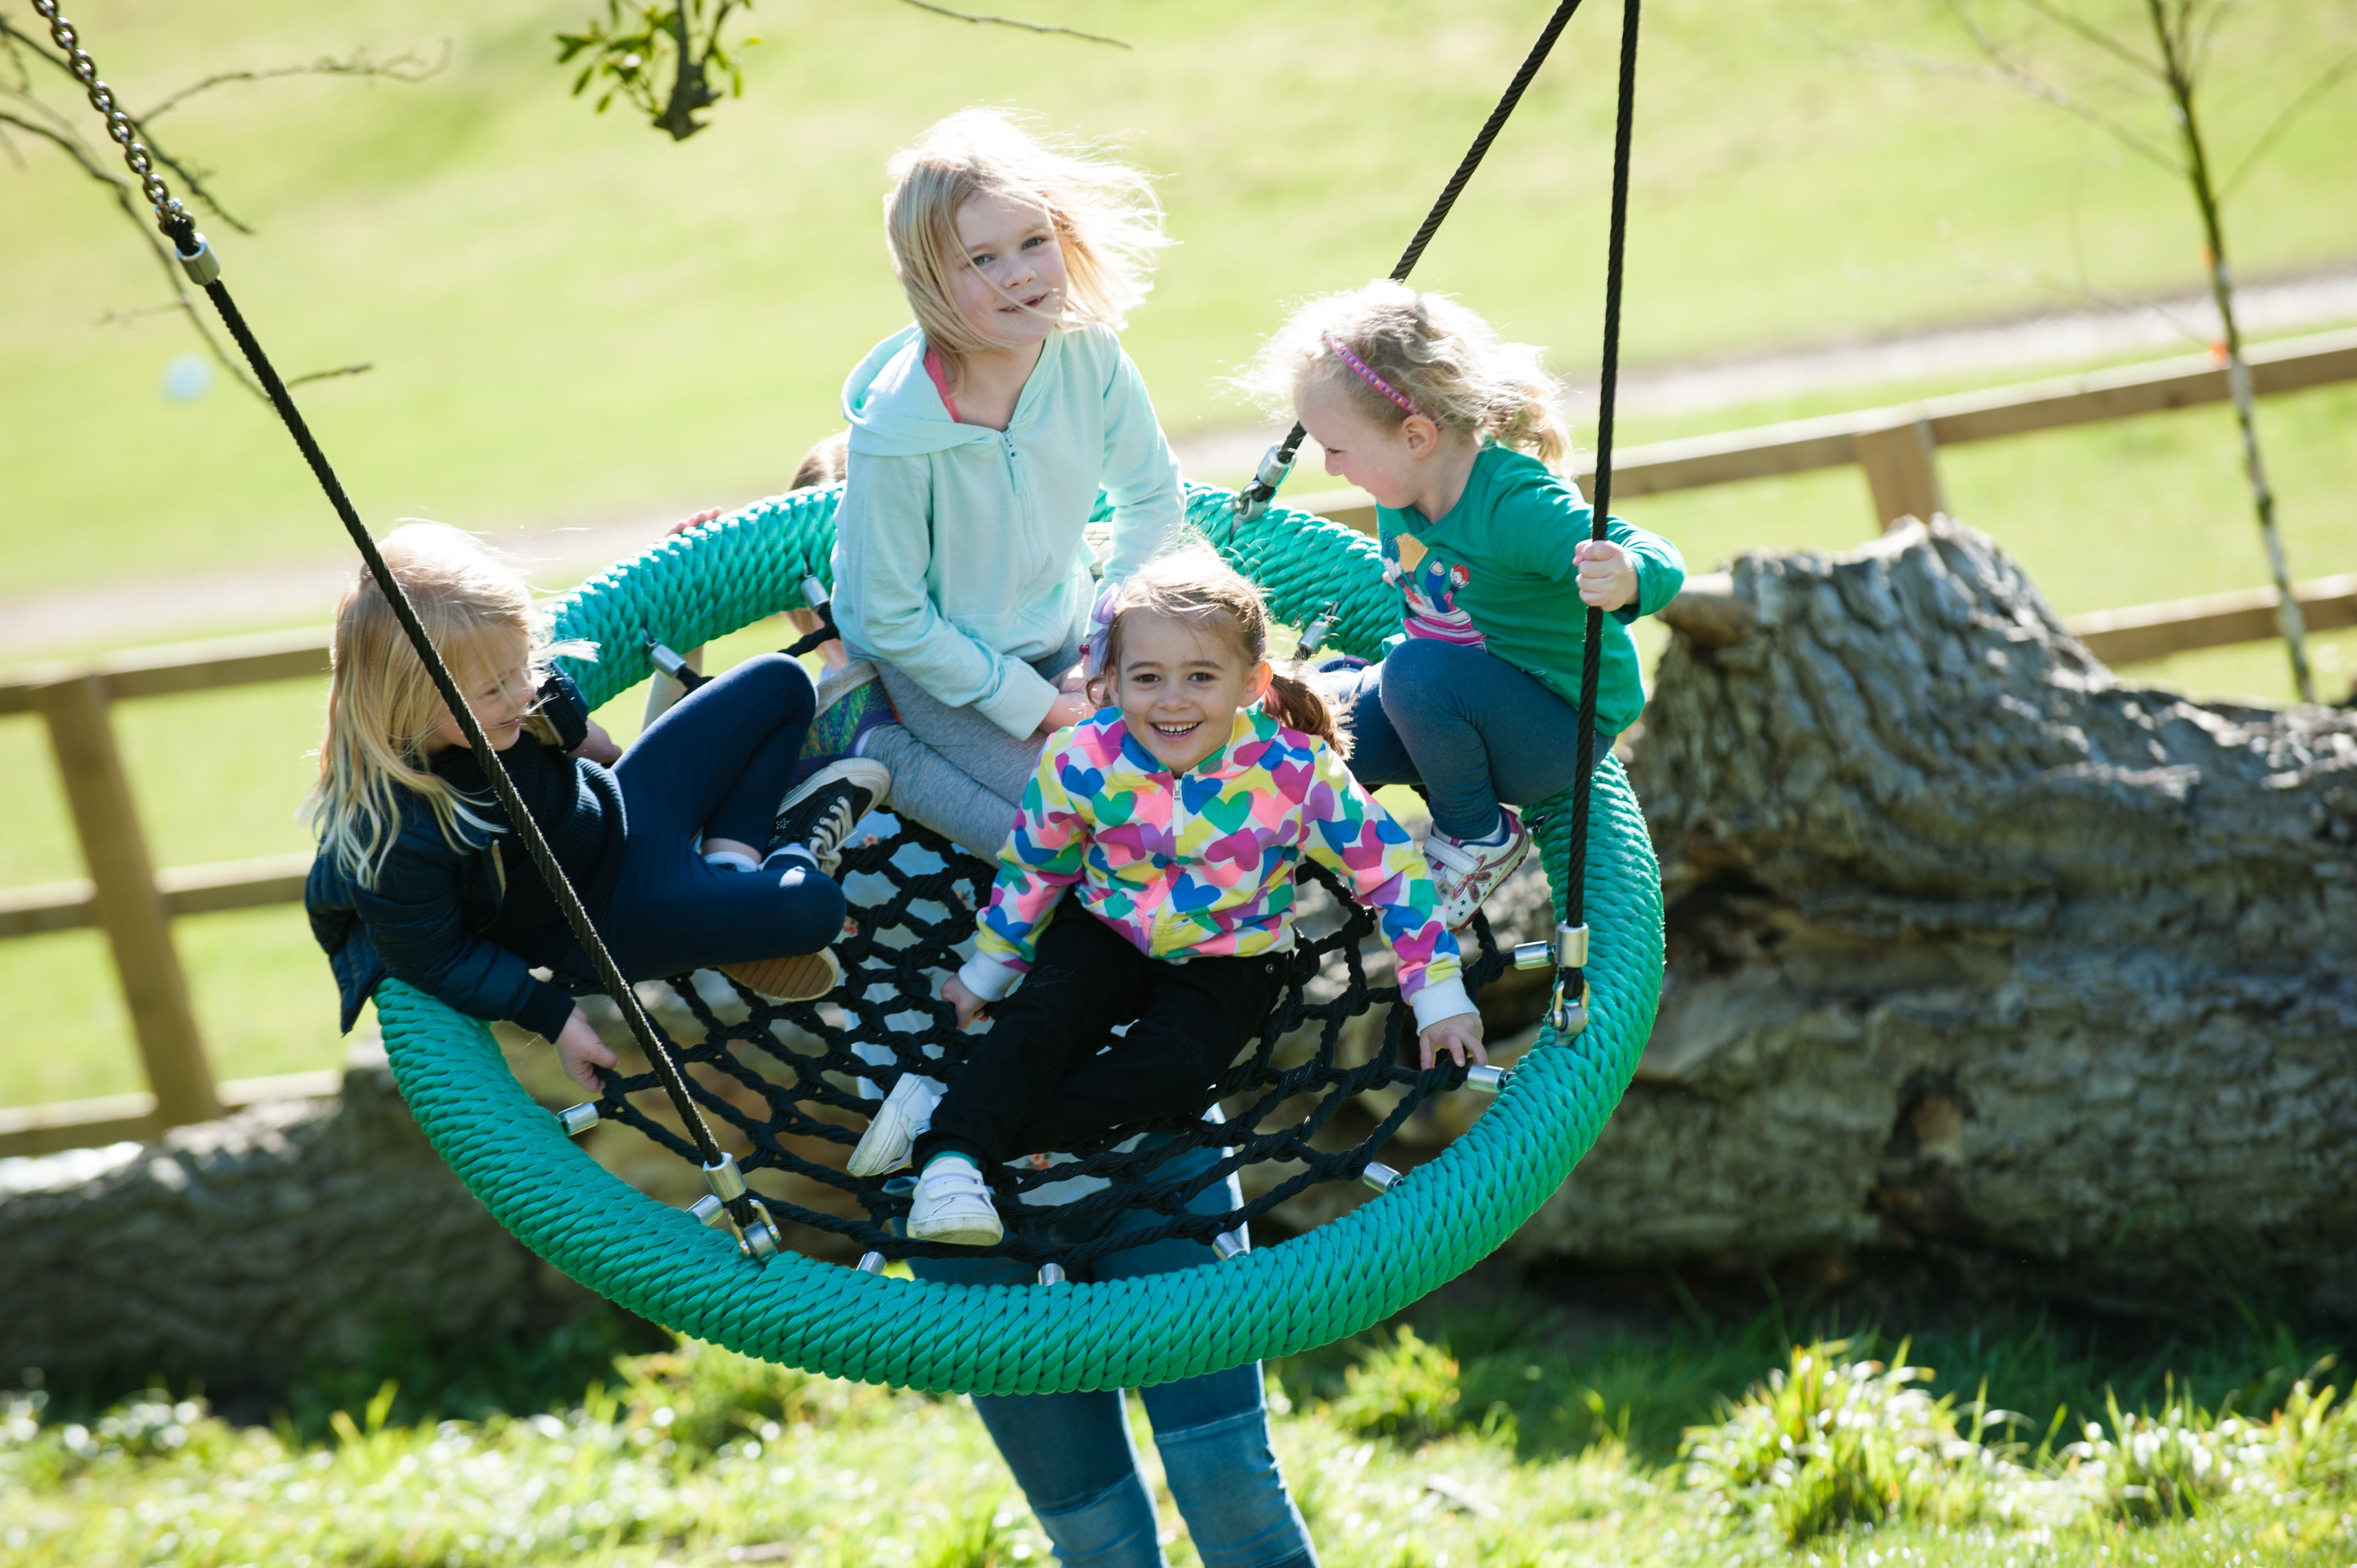 The well-known Cradle Nest Swing is a basket swing for play areas and group swing